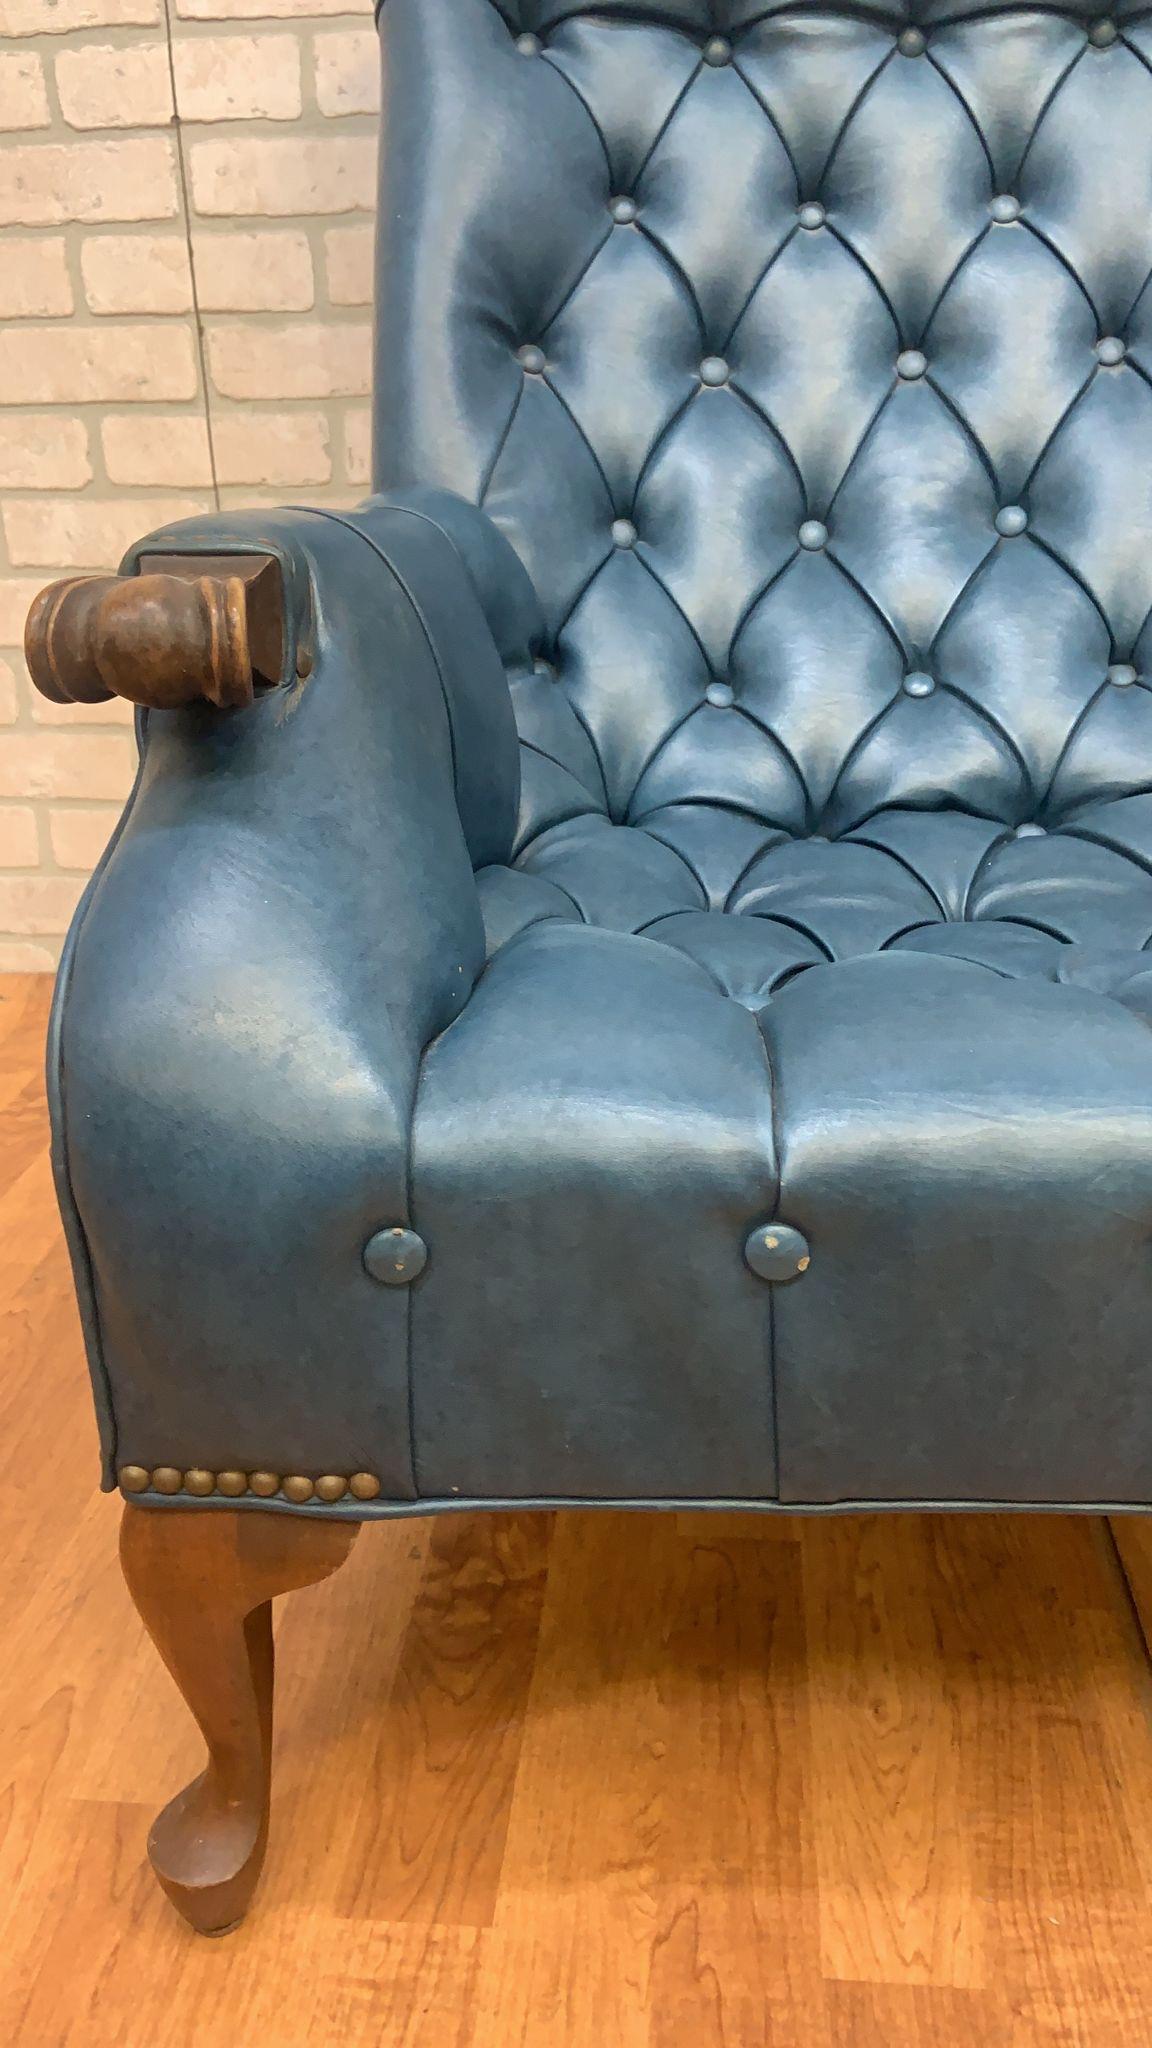 Vintage Sleepy Hollow Blue Tufted Chair and Ottoman - 2 Piece Set

A vintage, original condition, Sleepy Hollow chair by Mall City Furniture. This classic Regency style chair has a low seat height but is ridiculously comfortable. If you haven’t had